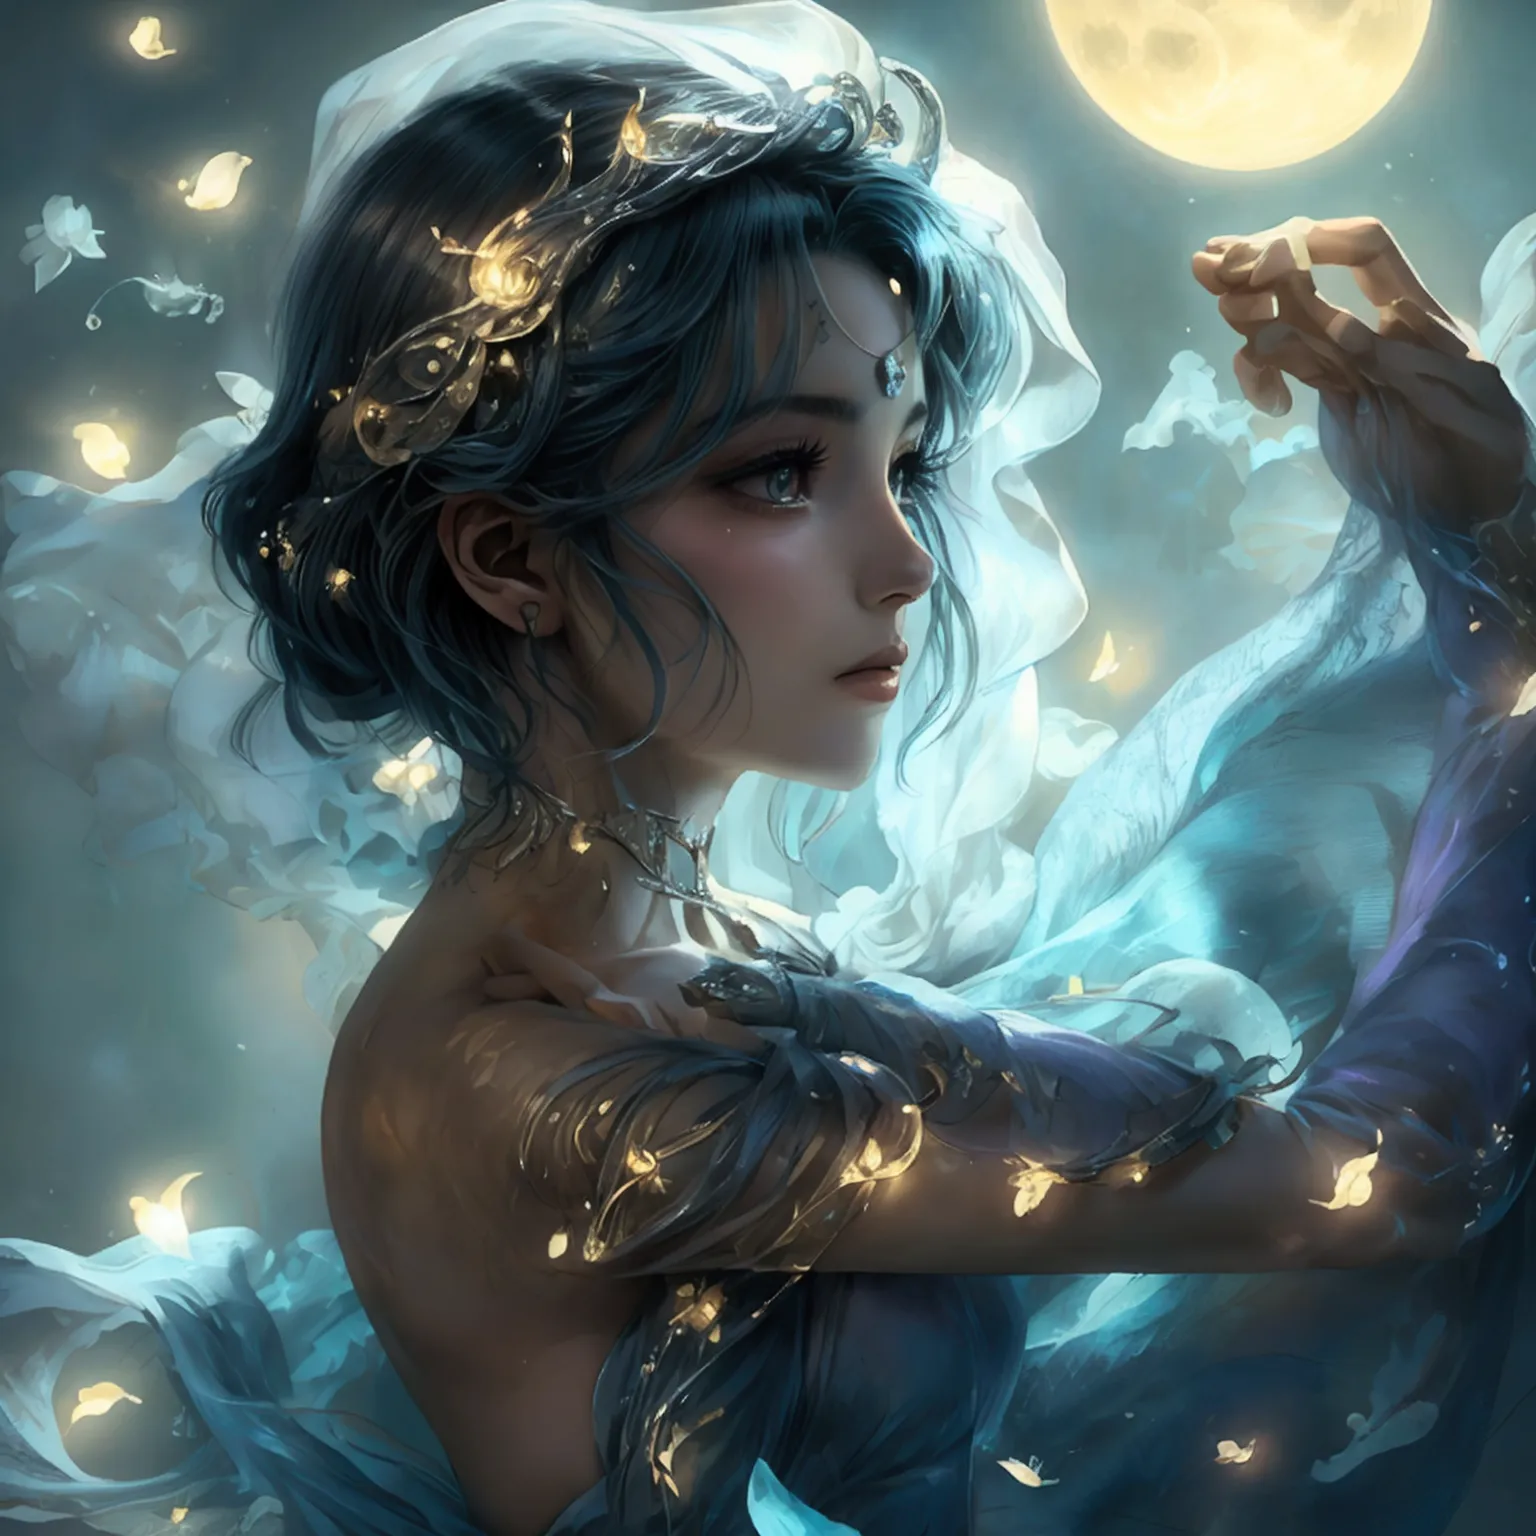 Design an anime-style character named Luna, styled as 'Moonlight Dancer.' Luna should have a graceful and enchanting expression,...